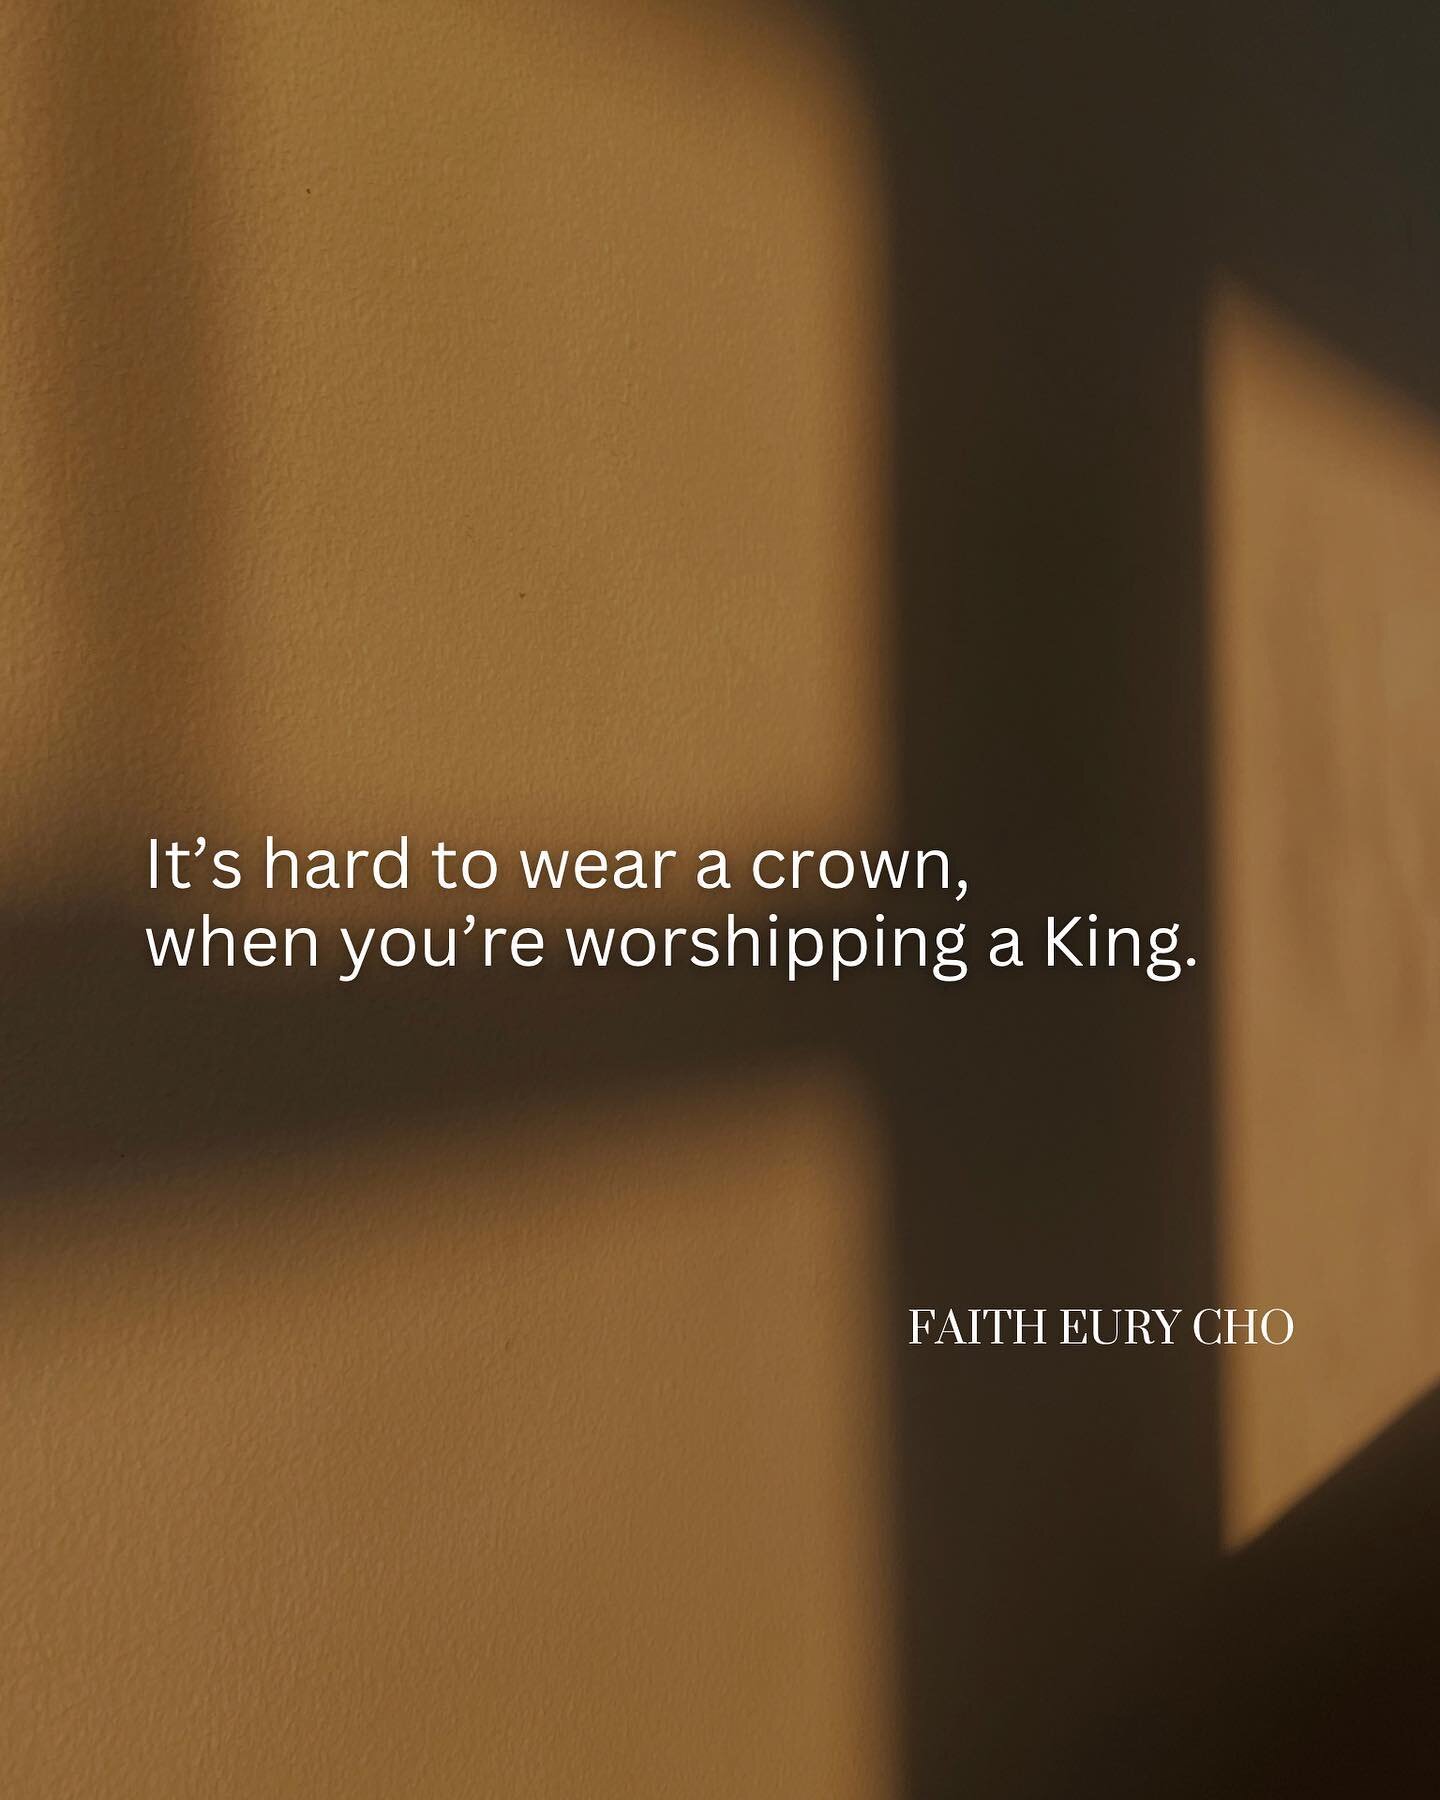 &ldquo;&hellip;They cast their crowns before the throne and say, &lsquo;Our Lord and God,
you are worthy to receive glory and honor and power, because you have created all things, and by your will
they exist and were created.&rsquo;&rdquo; Rev 4:10b-